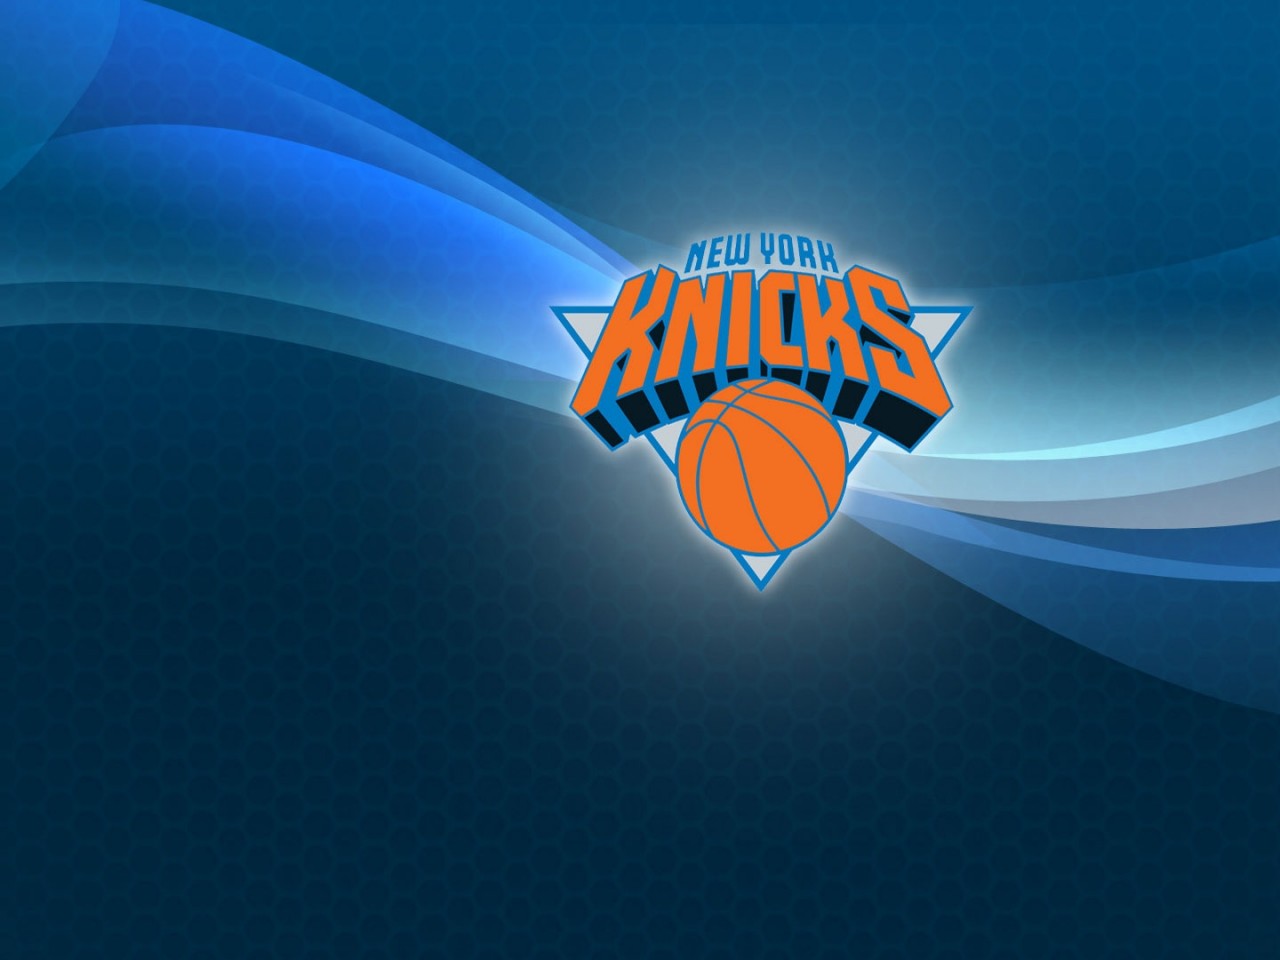 New York Knicks phone wallpaper 1080P 2k 4k Full HD Wallpapers  Backgrounds Free Download  Wallpaper Crafter